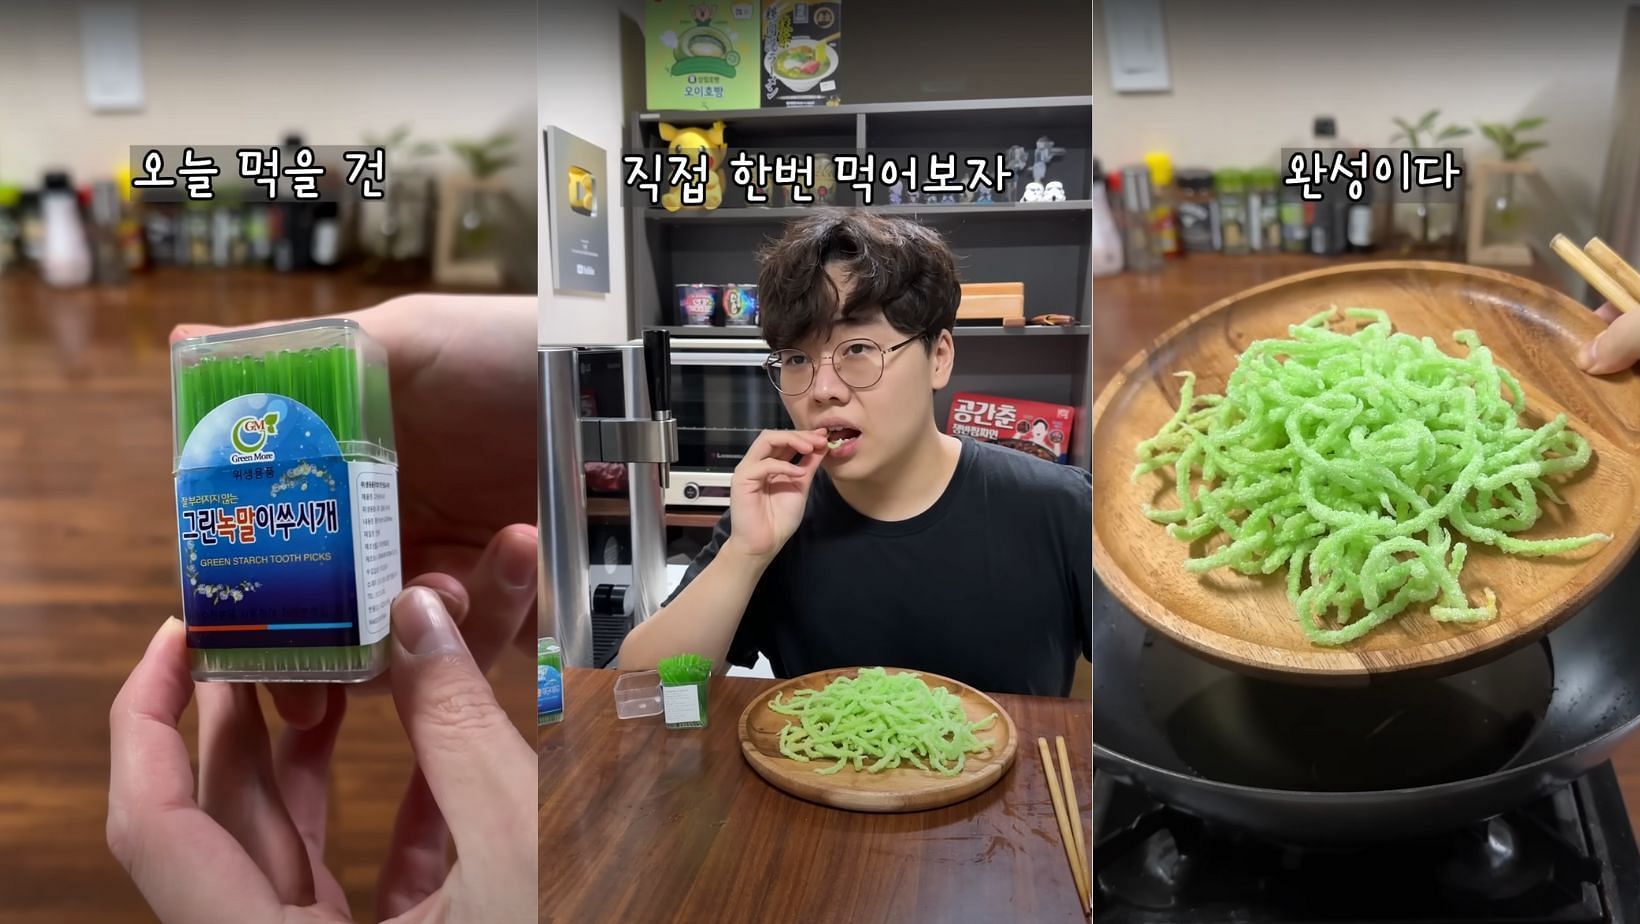 Why are Korean influencers eating toothpicks? Viral social media trend explained amid rising concerns. (Images via YouTube/ @Du_man_)